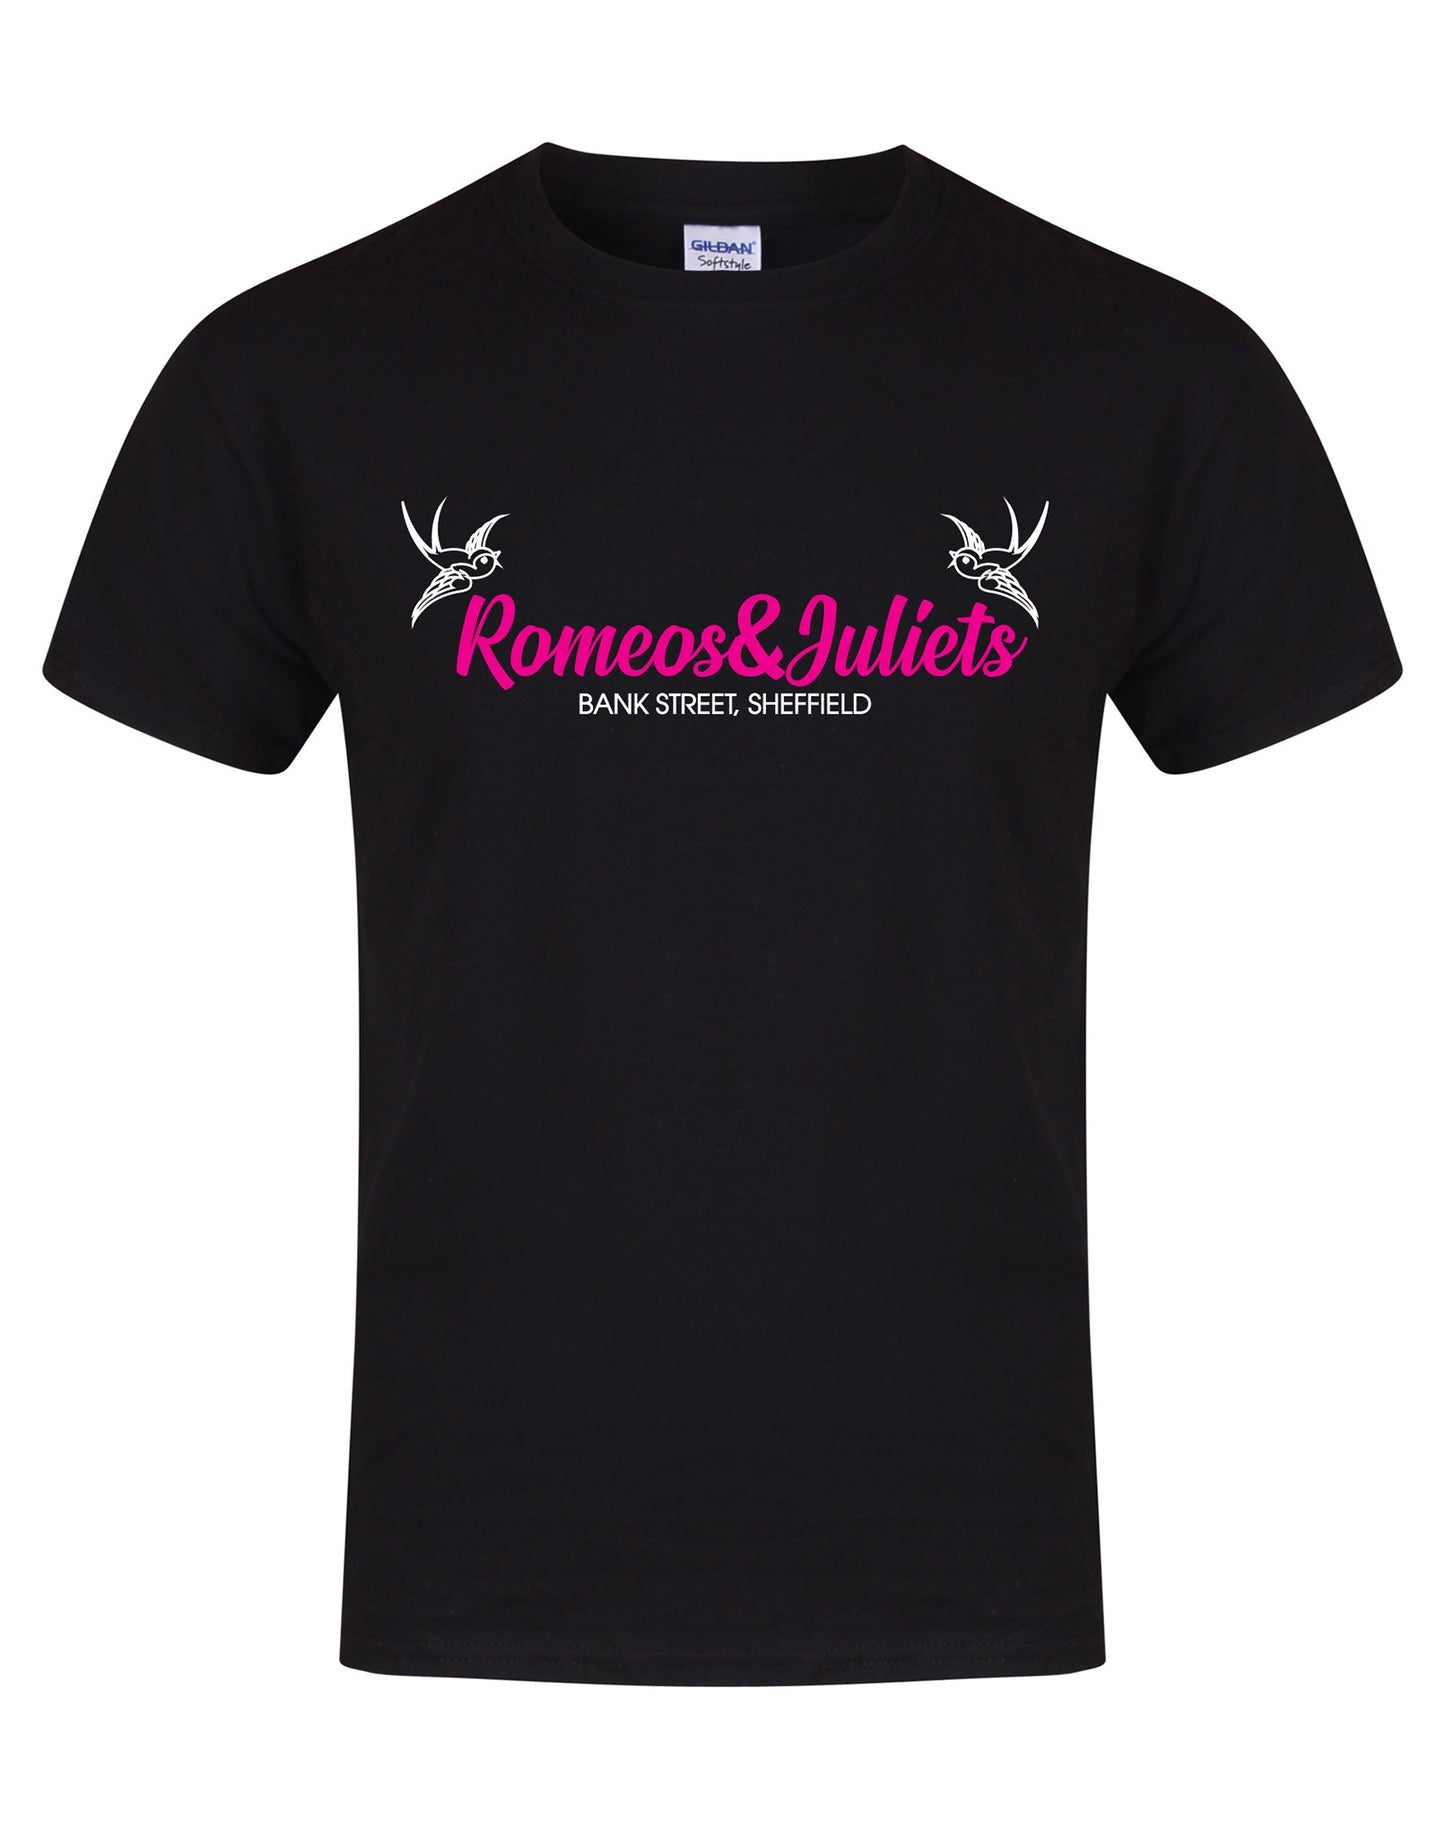 Romeos & Juliets unisex fit T-shirt - various colours - Dirty Stop Outs